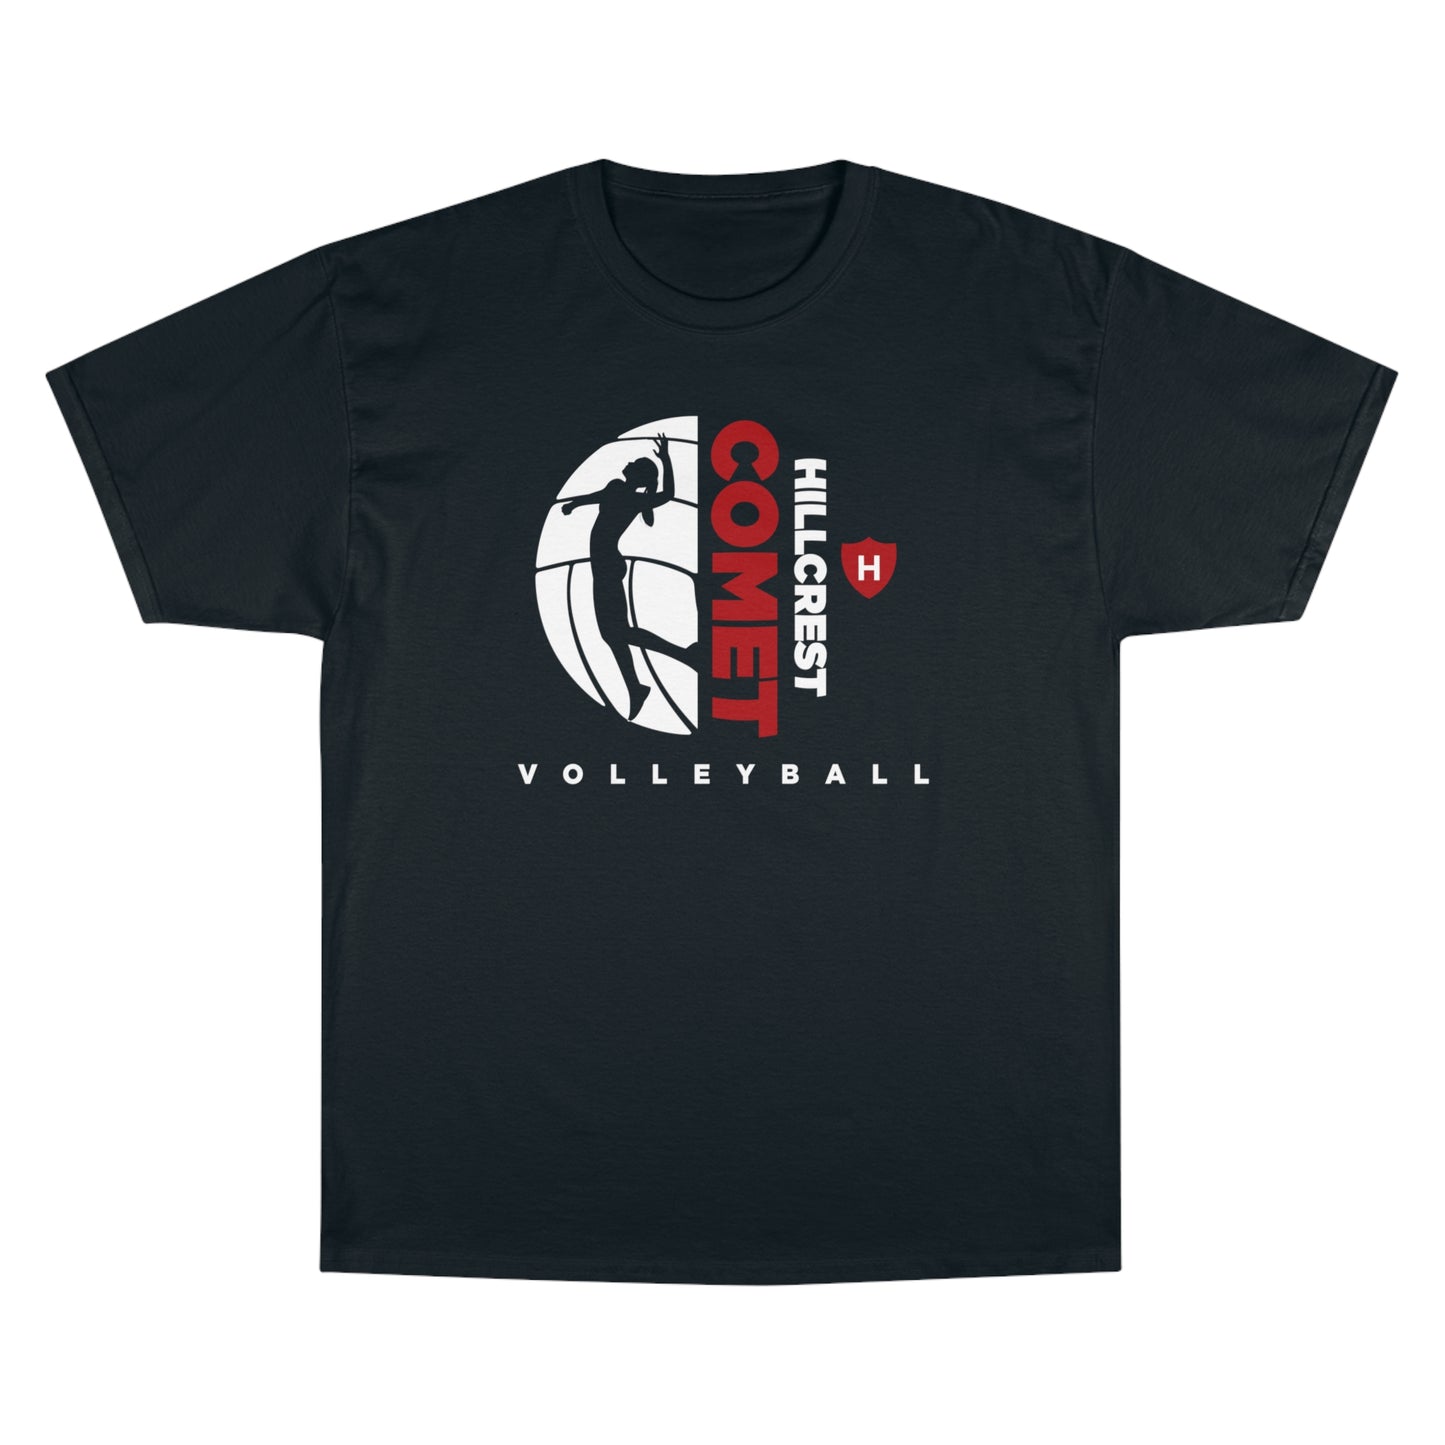 Comet Volleyball - Champion T-Shirt